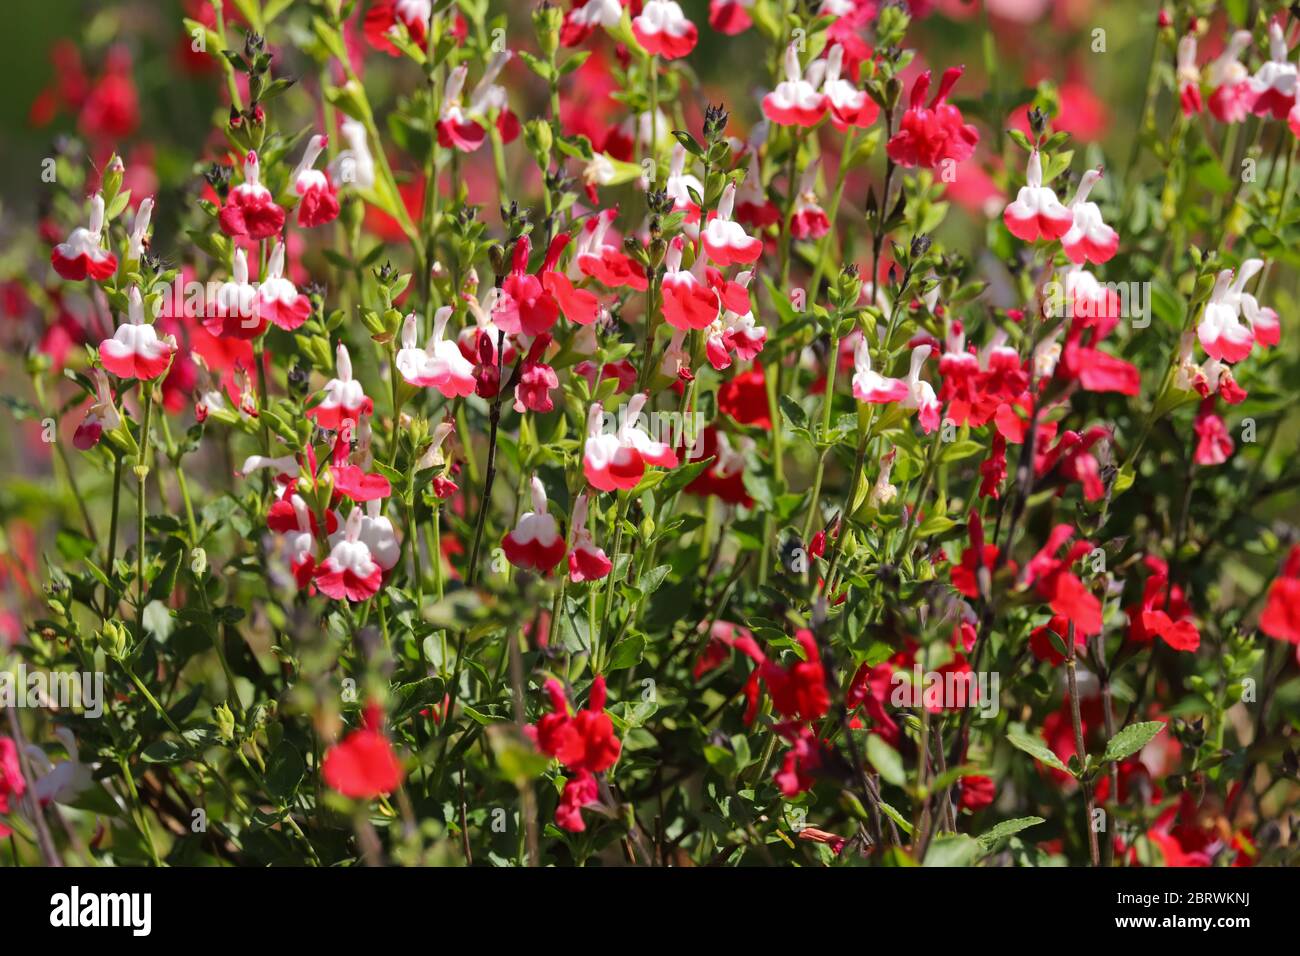 Red and white flowers of Salvia hot lips, Salvia microphylla, growing in the spring sunshine Stock Photo